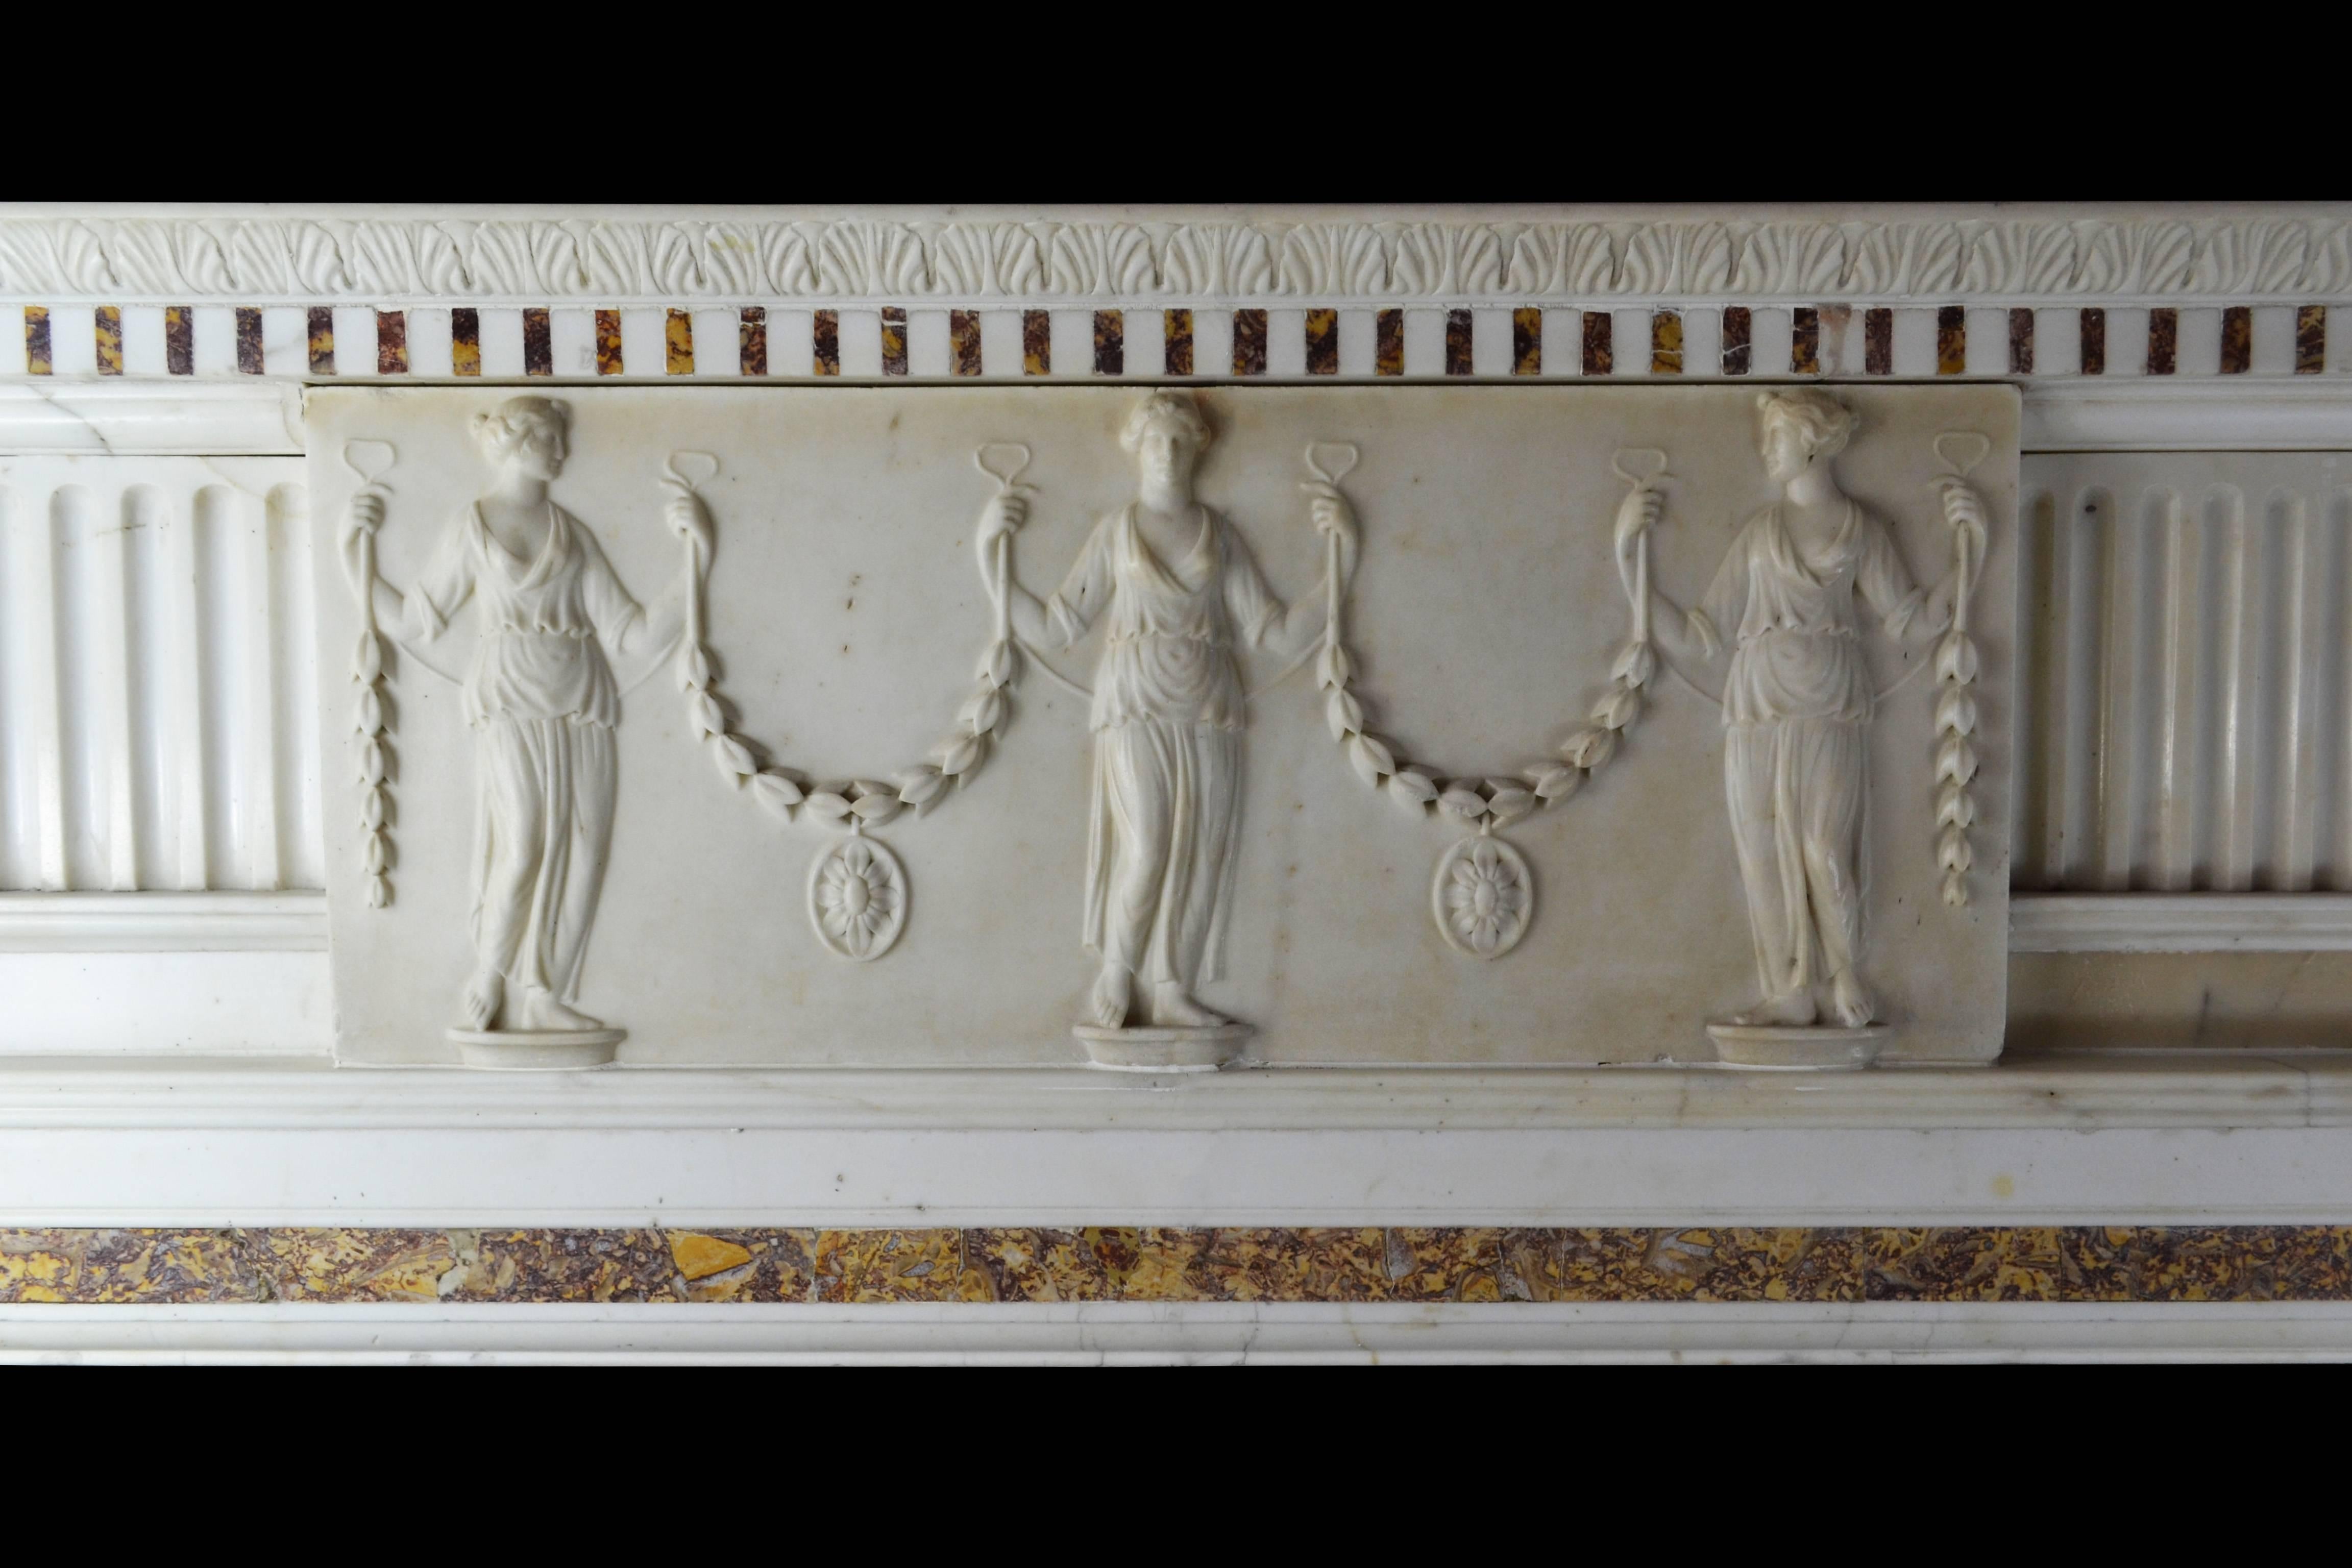 A late 18th century English marble mantel of good quality and in good condition incorporating unrelated 18th century elements of similar quality and even date.

In Italian Statuary with inlays of Spanish Brocatella marble to the pilasters,